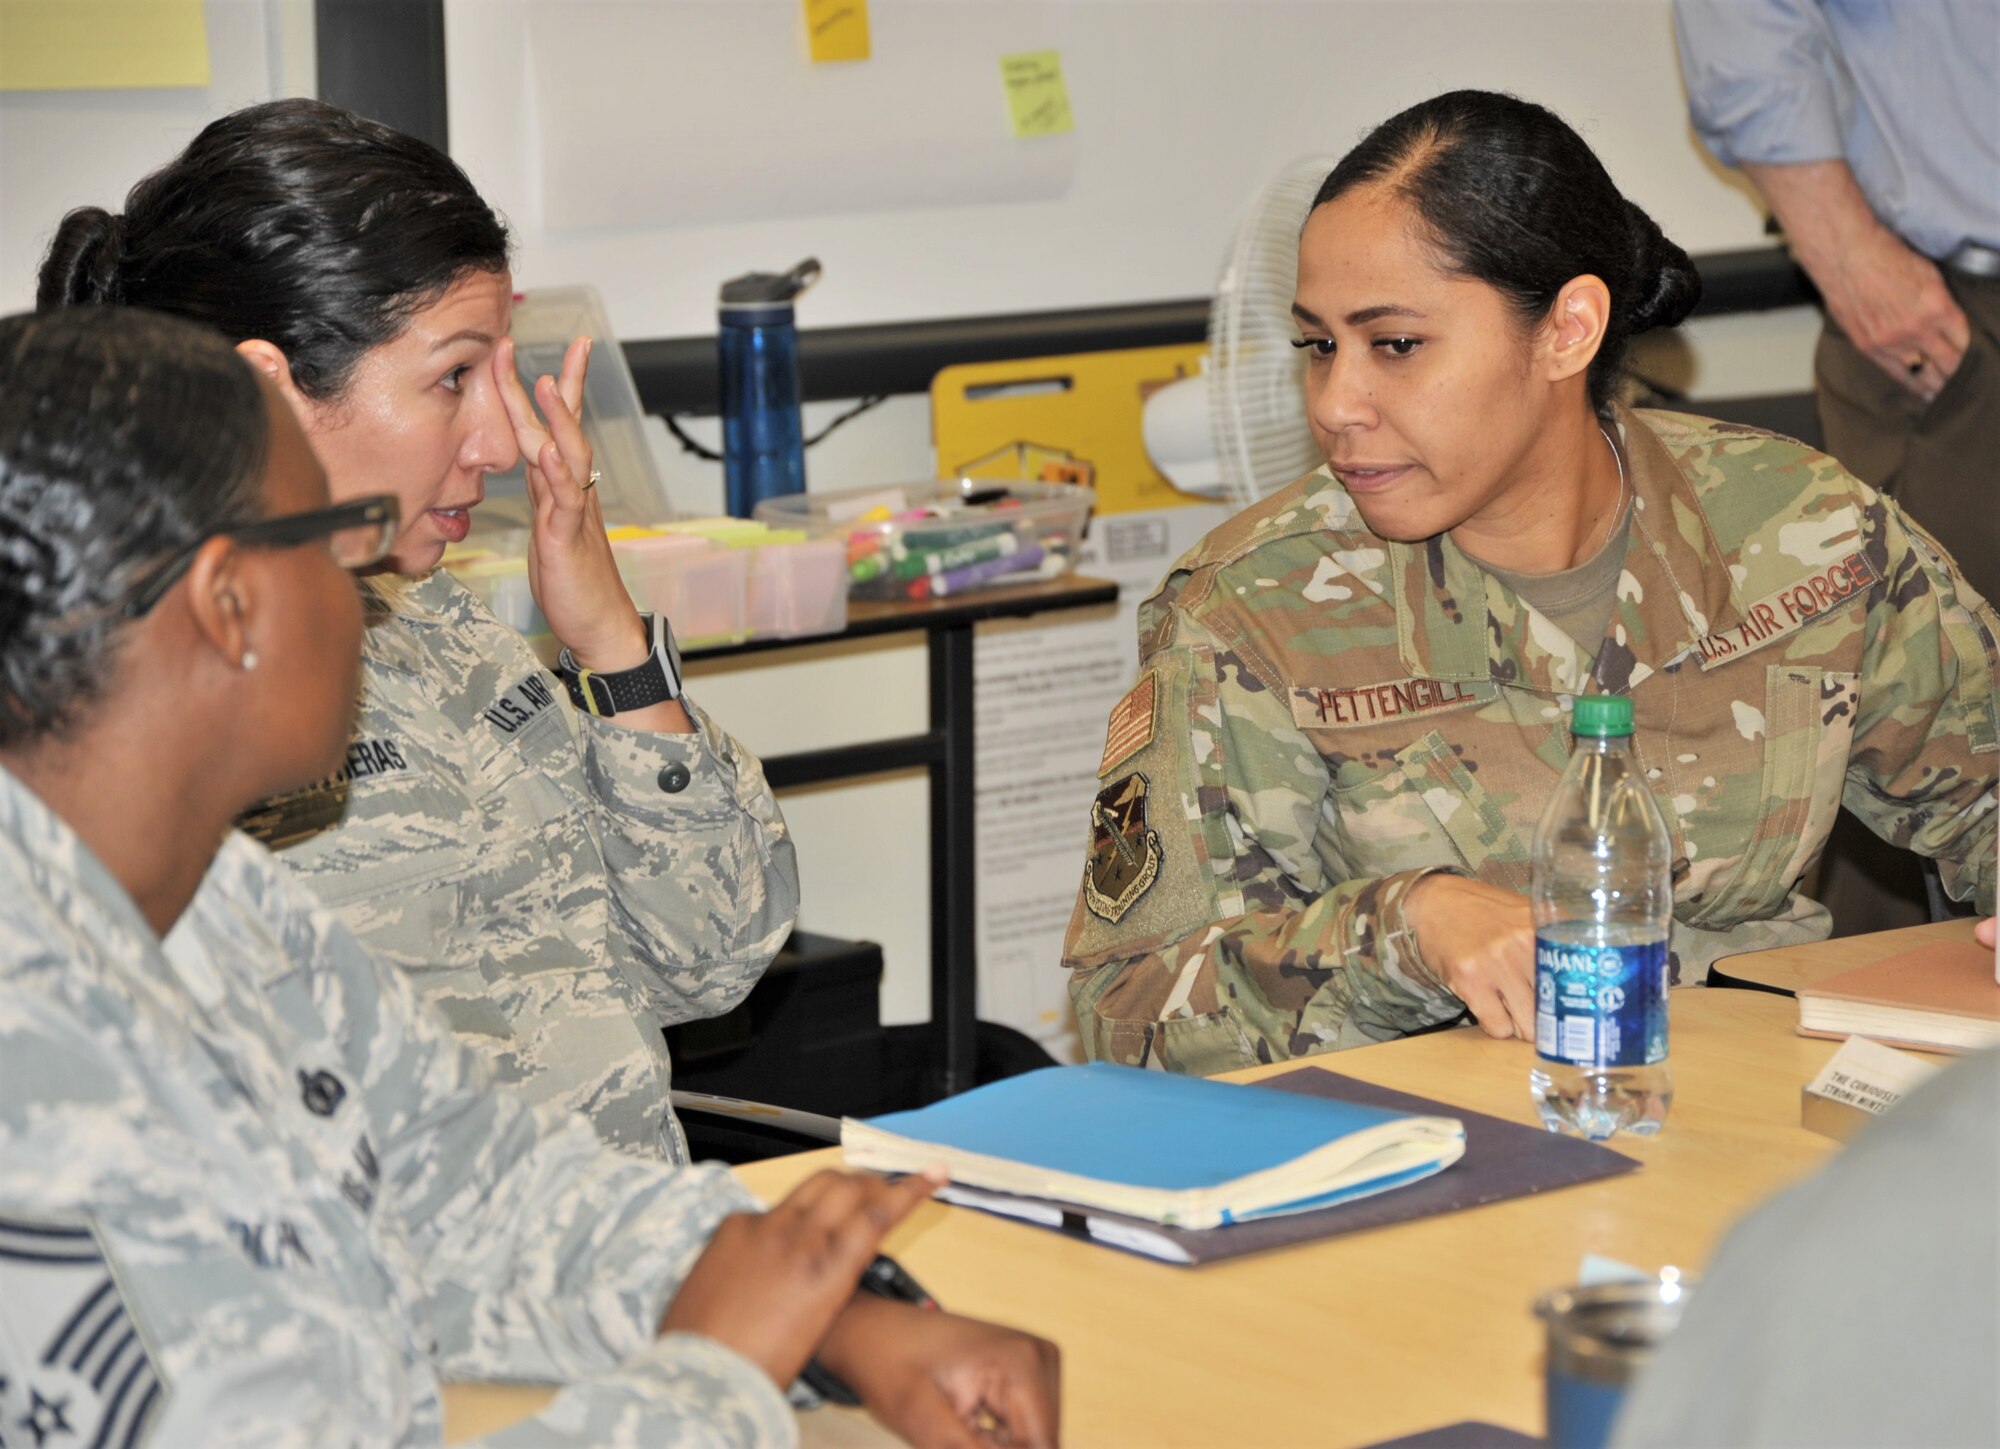 Senior Master Sgt. Tricia Adolphues, 5th Flying Training Squadron personnel superintendent (left), Senior Master Sgt. Vianca Contreras, 97th Flying Training Squadron superintendent and Master Sgt. Tainell Pettengill (right) discuss pay processes at the Nov. 19-21 continuous process improvement event held at Joint Base San Antonio-Randolph, Texa,s to address pay issues that occur when Reserve members transition between pay statuses. (U.S. Air Force photo by Debbie Gildea)